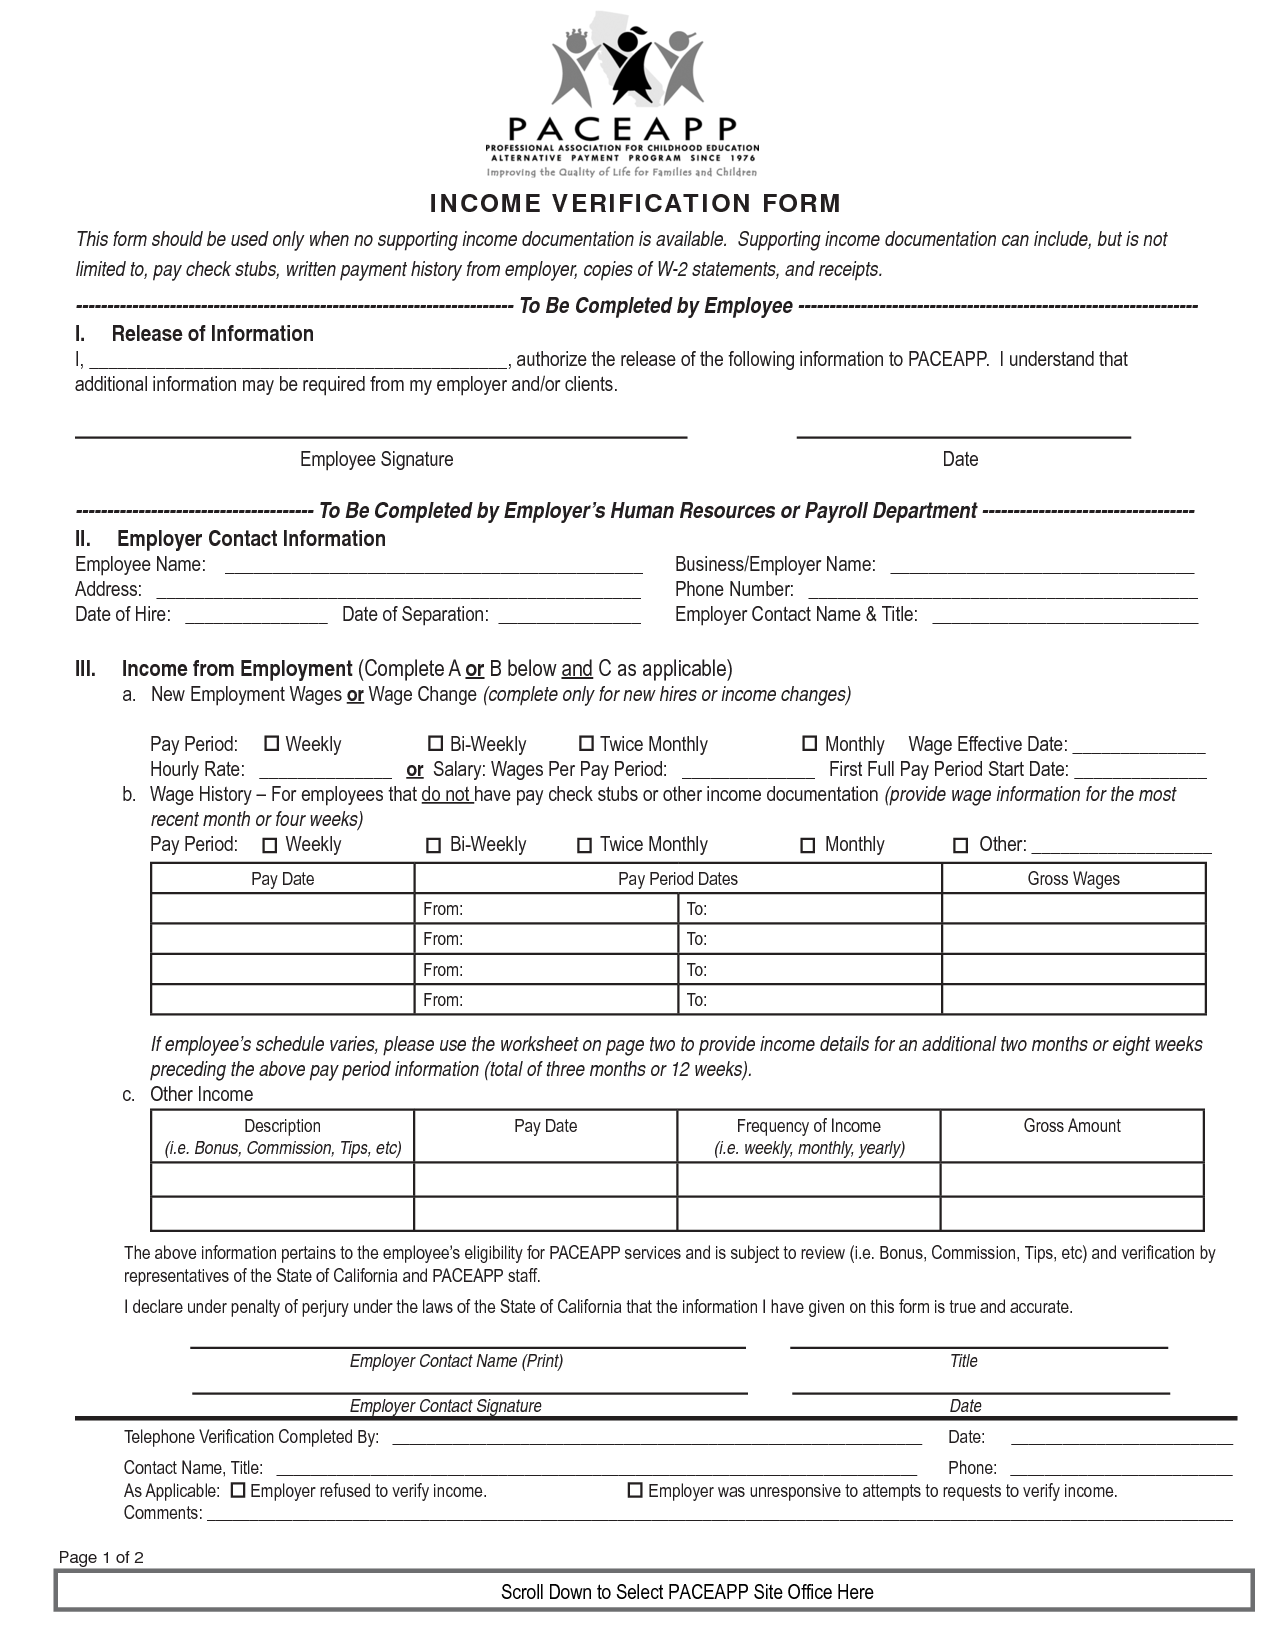 income-verification-form-template-free-printable-documents